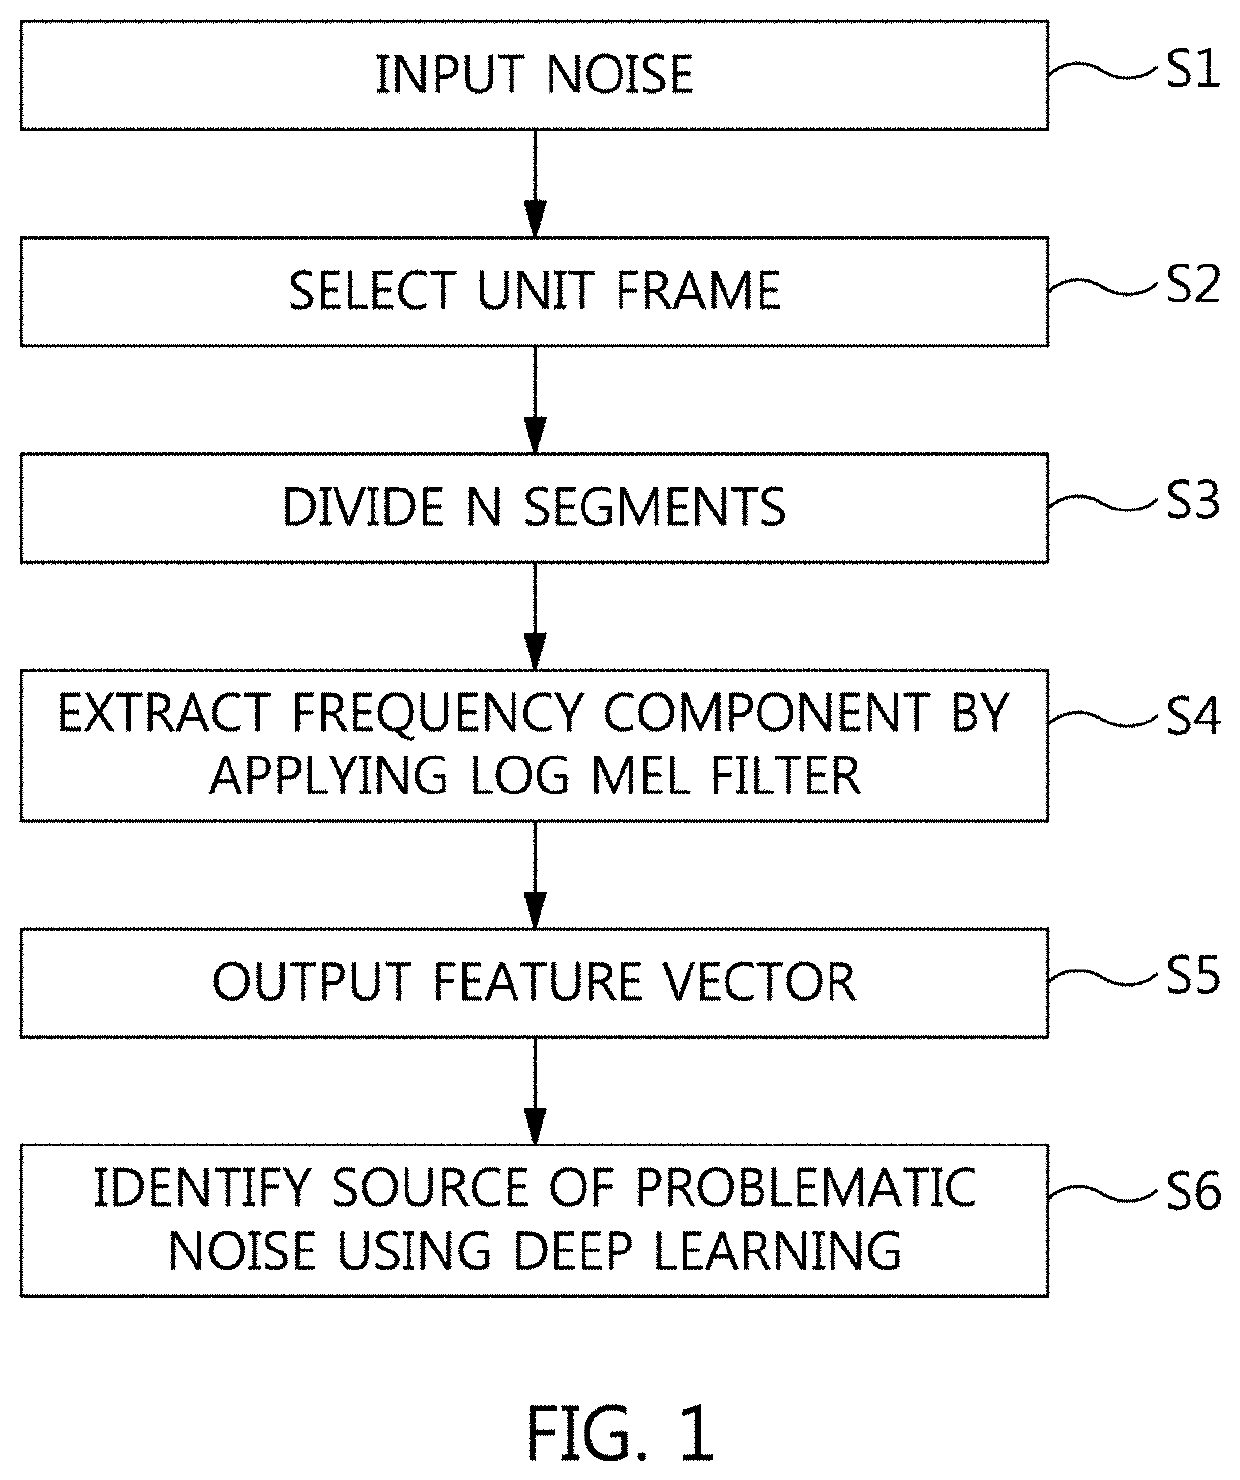 Noise data artificial intelligence apparatus and pre-conditioning method for identifying source of problematic noise